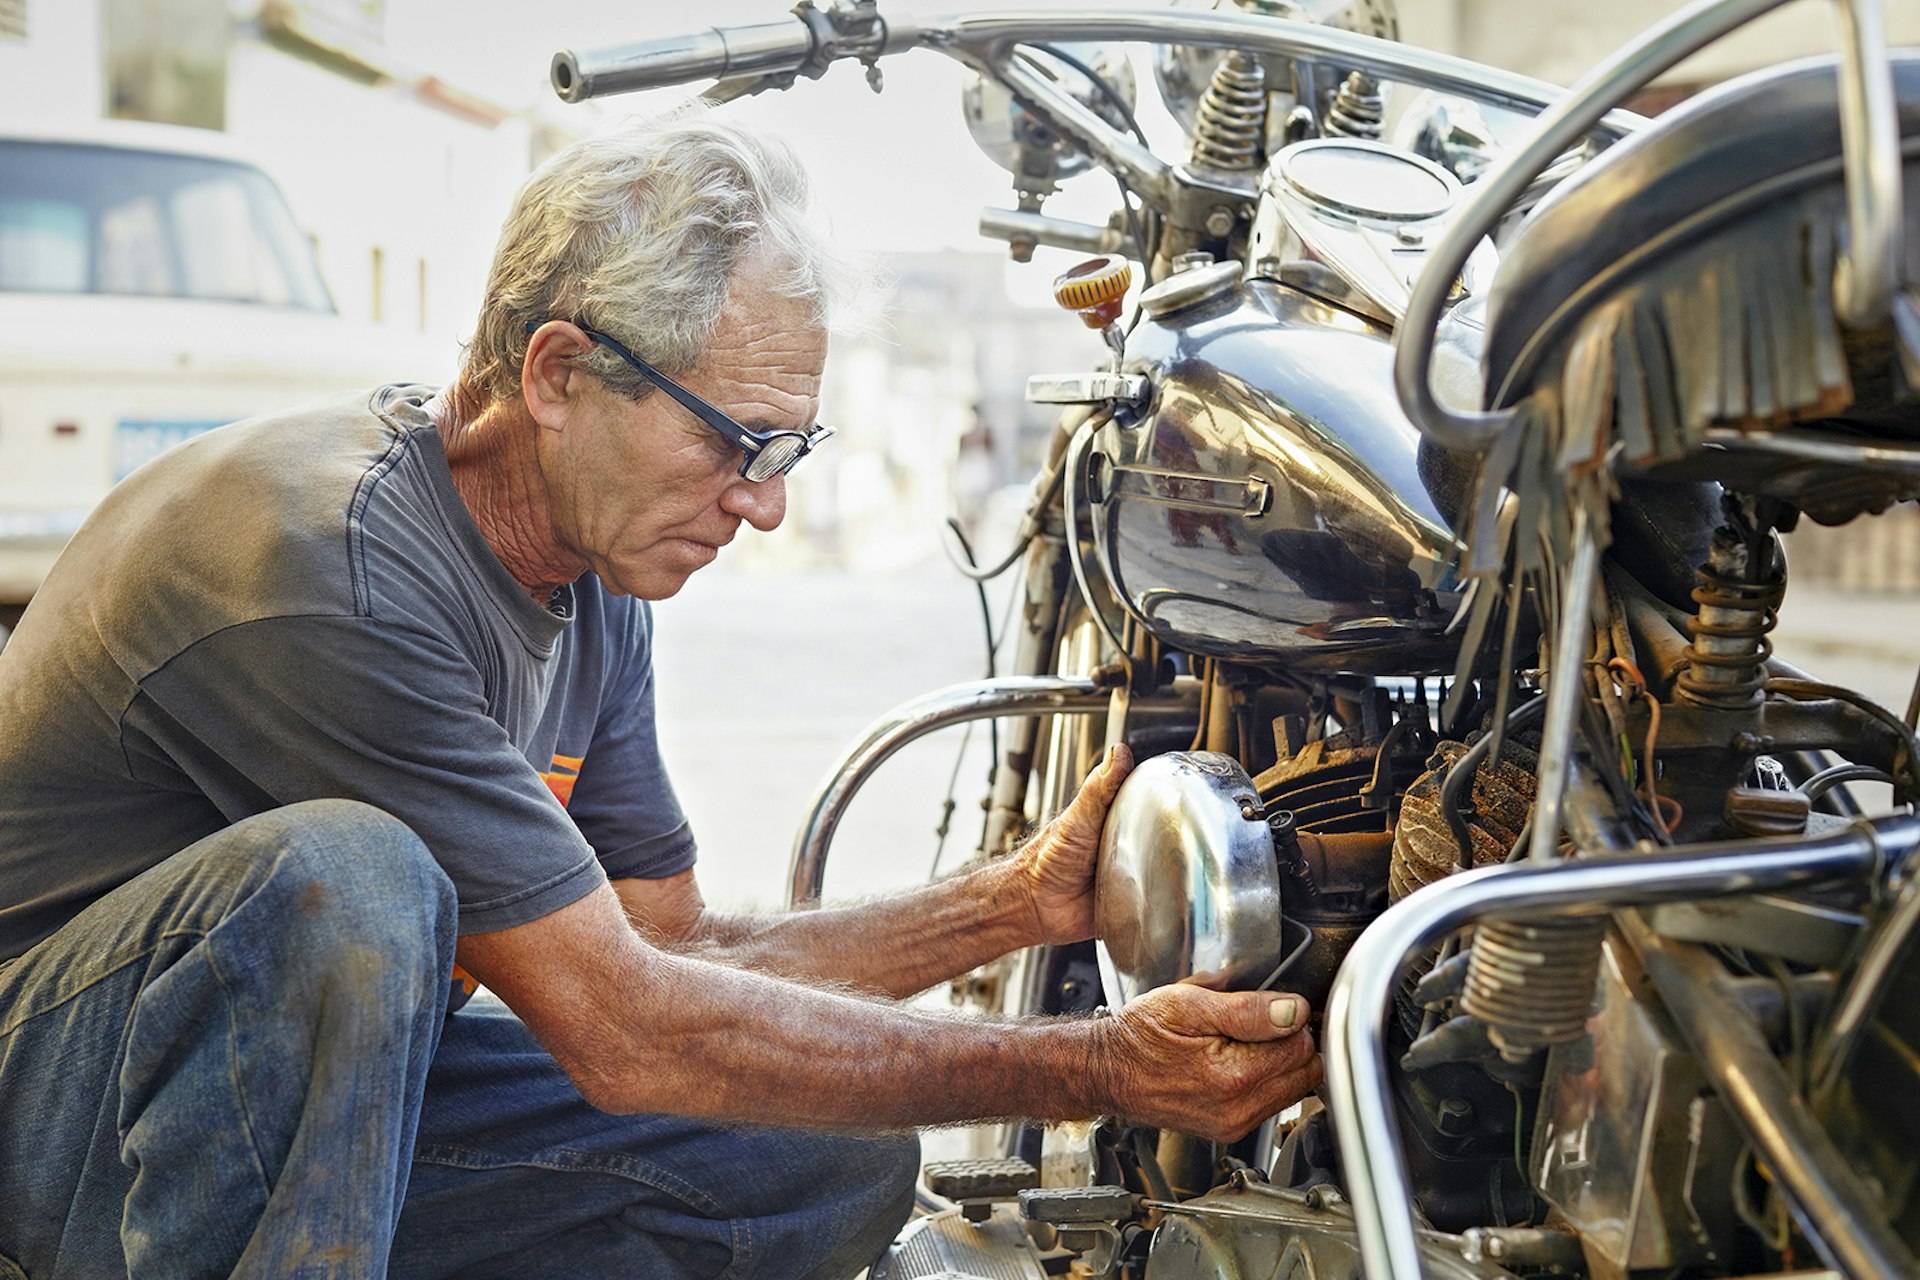 Features - Older man examining his motorcycle